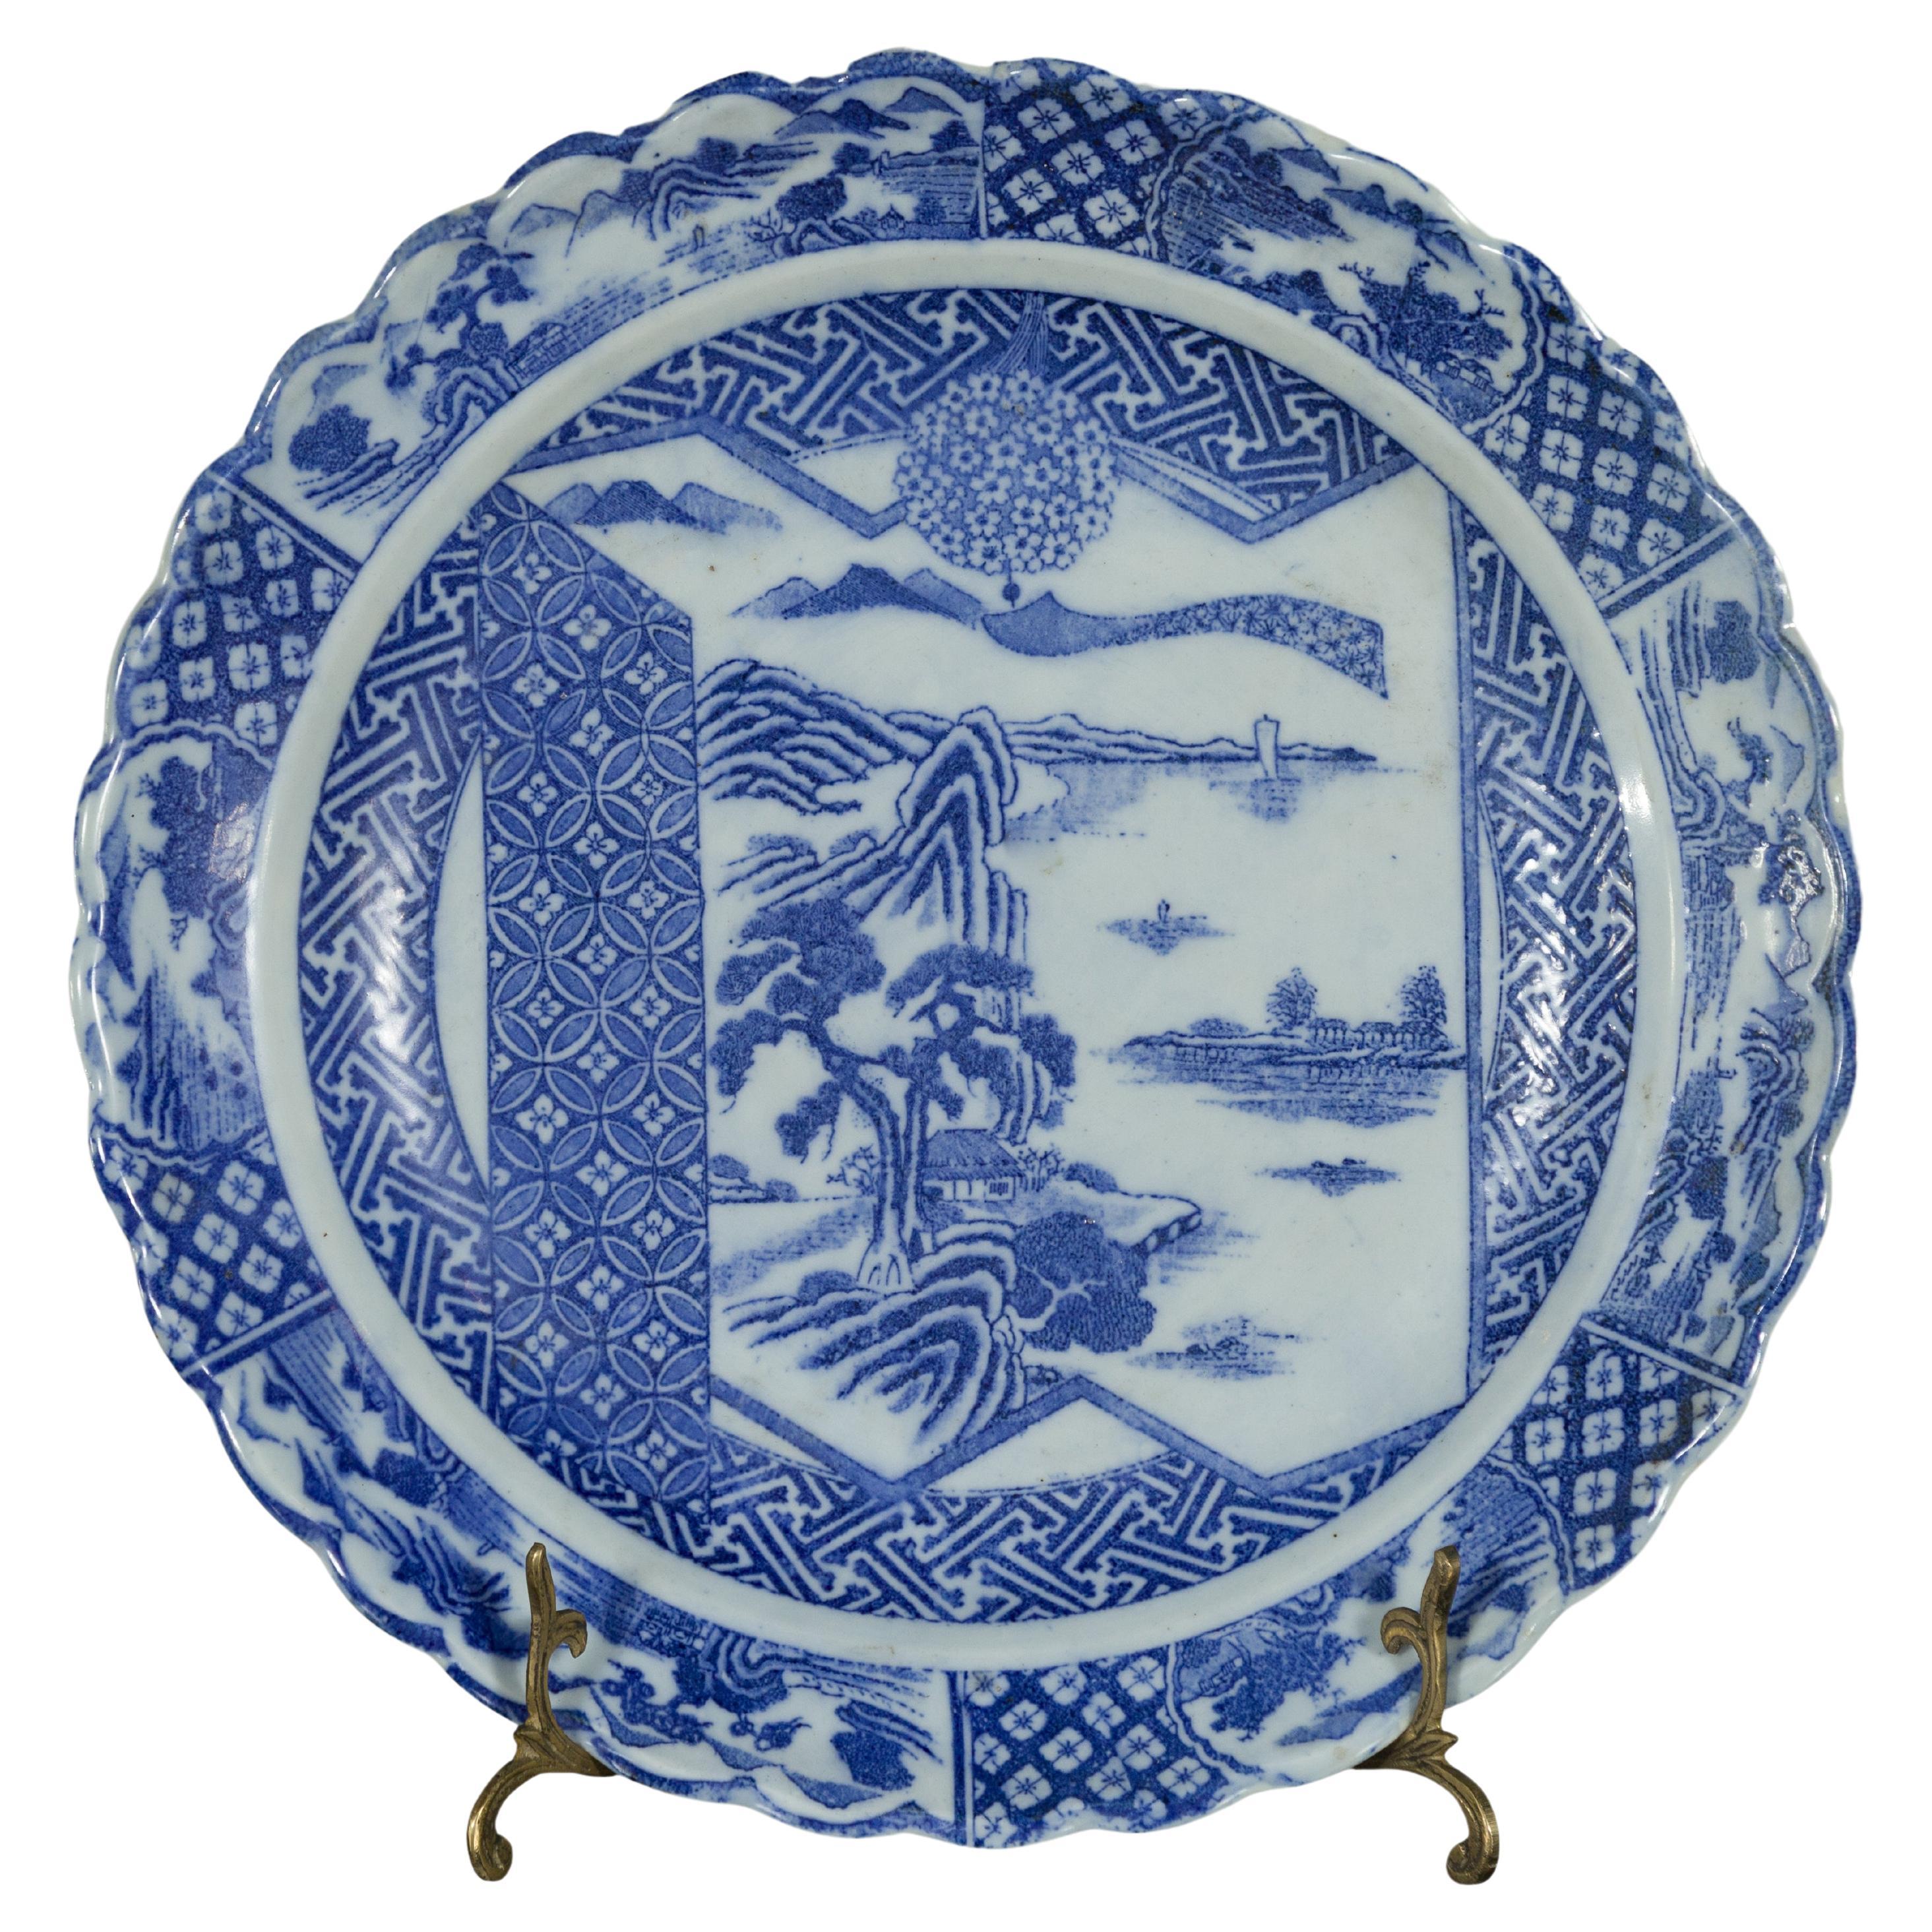 Japanese 19th Century Blue and White Porcelain Plate with Landscapes and Flowers For Sale